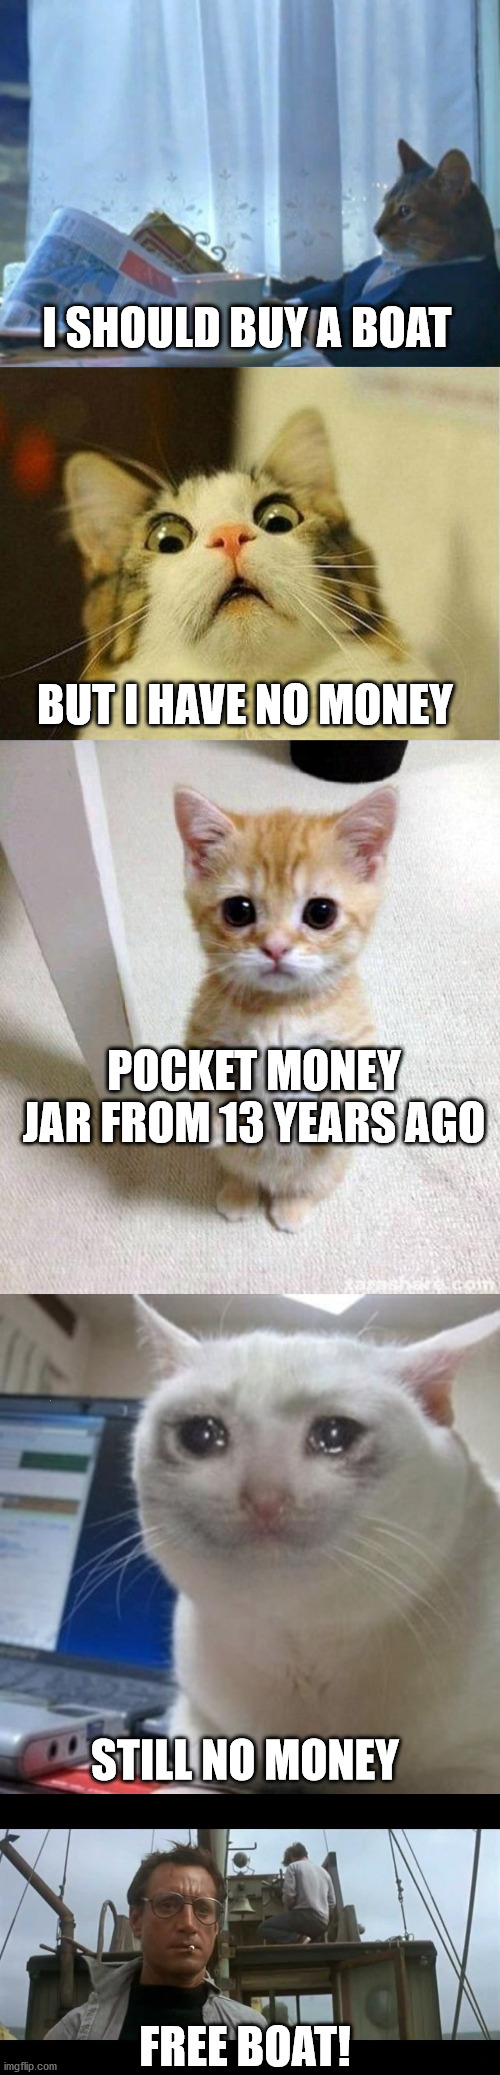 Free Boat | I SHOULD BUY A BOAT; BUT I HAVE NO MONEY; POCKET MONEY JAR FROM 13 YEARS AGO; STILL NO MONEY; FREE BOAT! | image tagged in memes,i should buy a boat cat,scared cat,cute cat,crying cat,jaws bigger boat | made w/ Imgflip meme maker